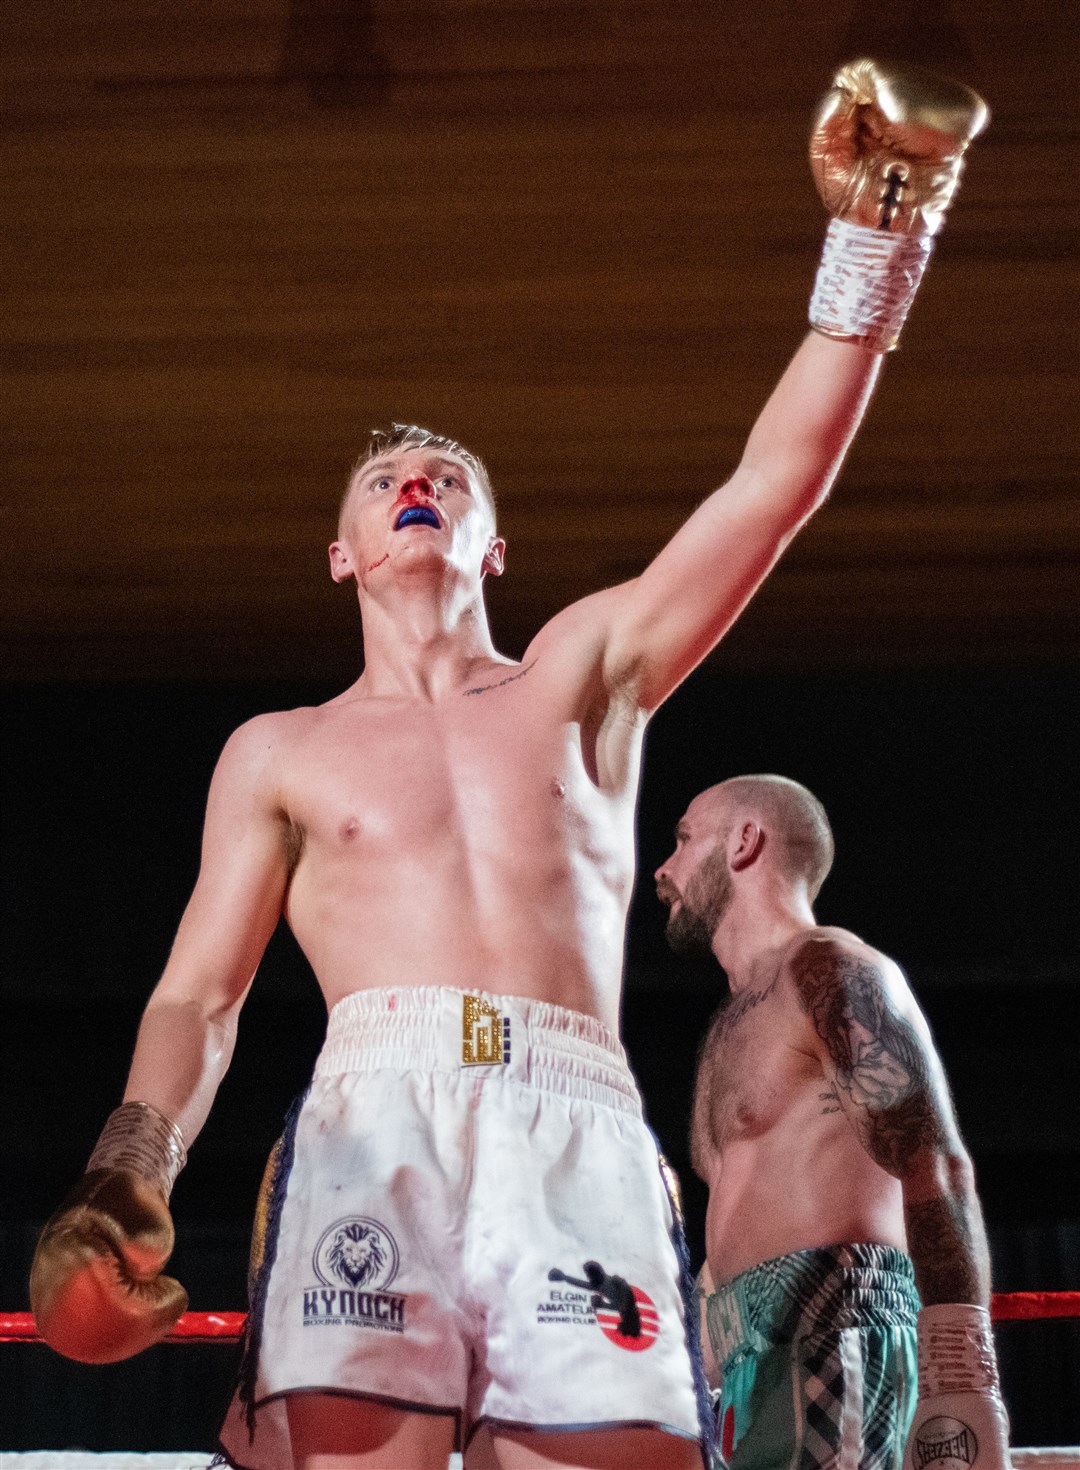 Bloodied but victorious. Fraser Wilkinson is the new champ. Picture: Daniel Forsyth..